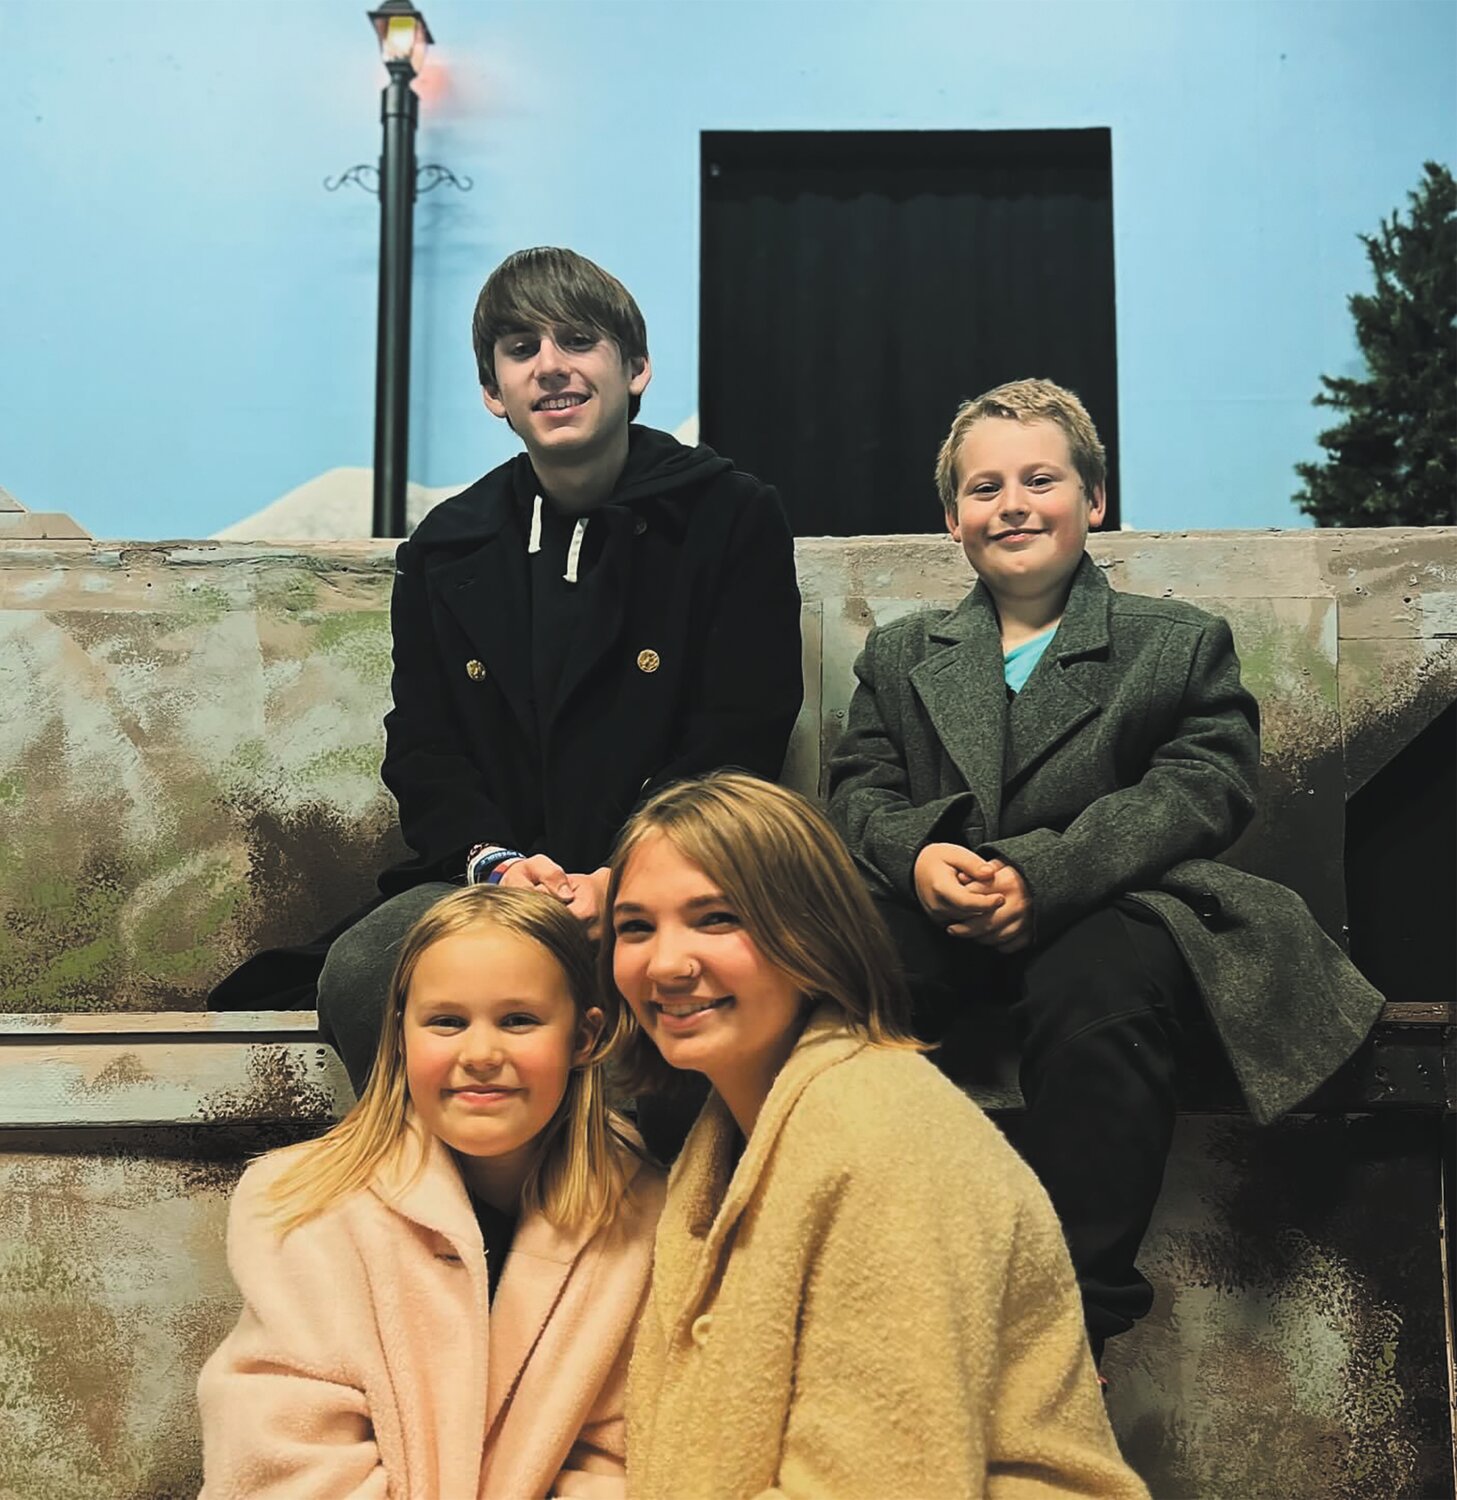 The cast of “The Lion, the Witch, and the Wardrobe” will bring the timeless classic to the Vanity Theater stage today through Sunday.
Tickets may be purchased online.